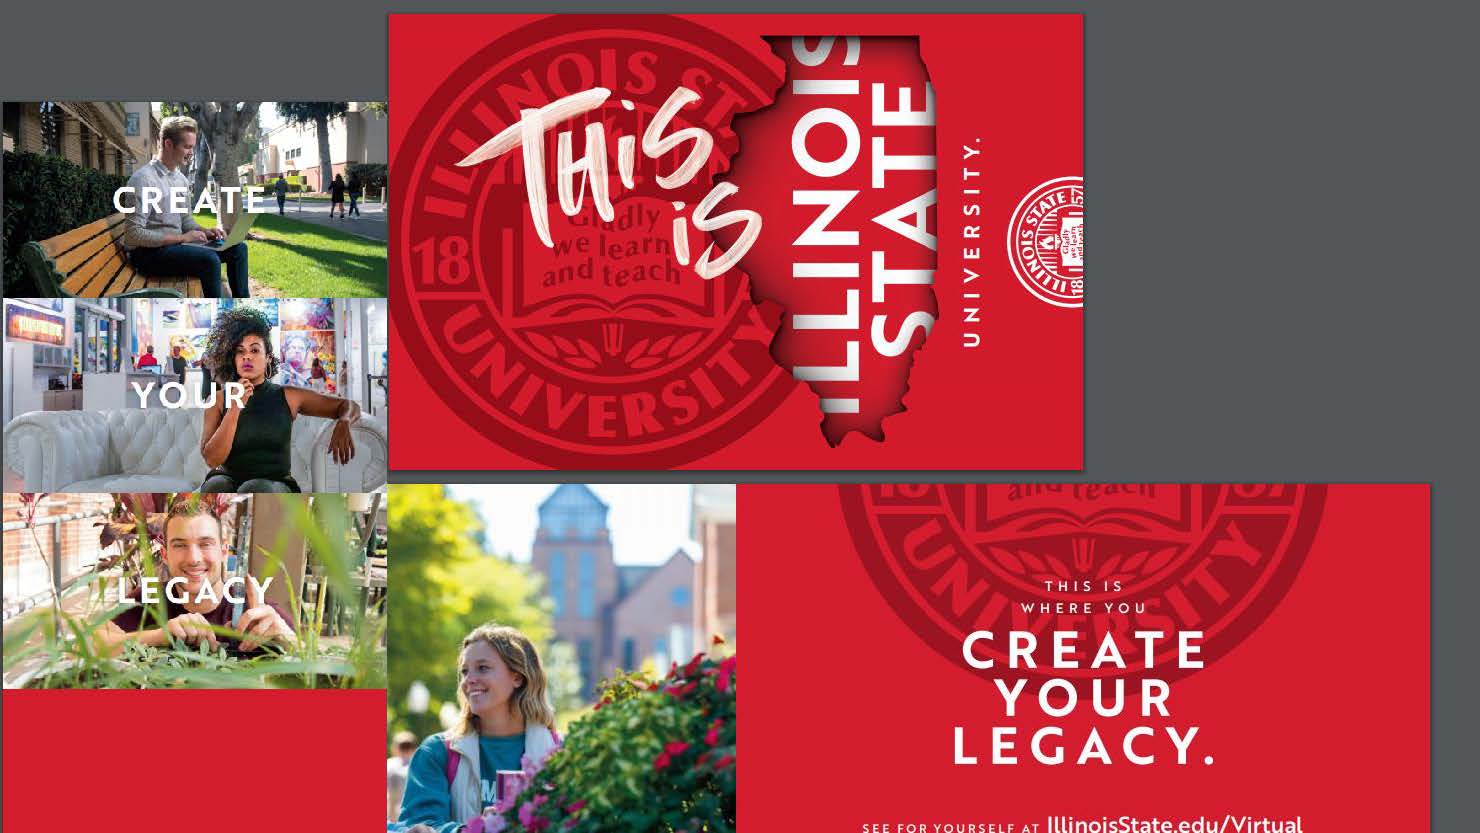 Publications, Student Recruitment-Individual Publication (Gold): Illinois State University Viewbook 2020 designed by Michael Mahle and Evan Walles and with photography by Lyndsie Schlink for the Office of Admissions.